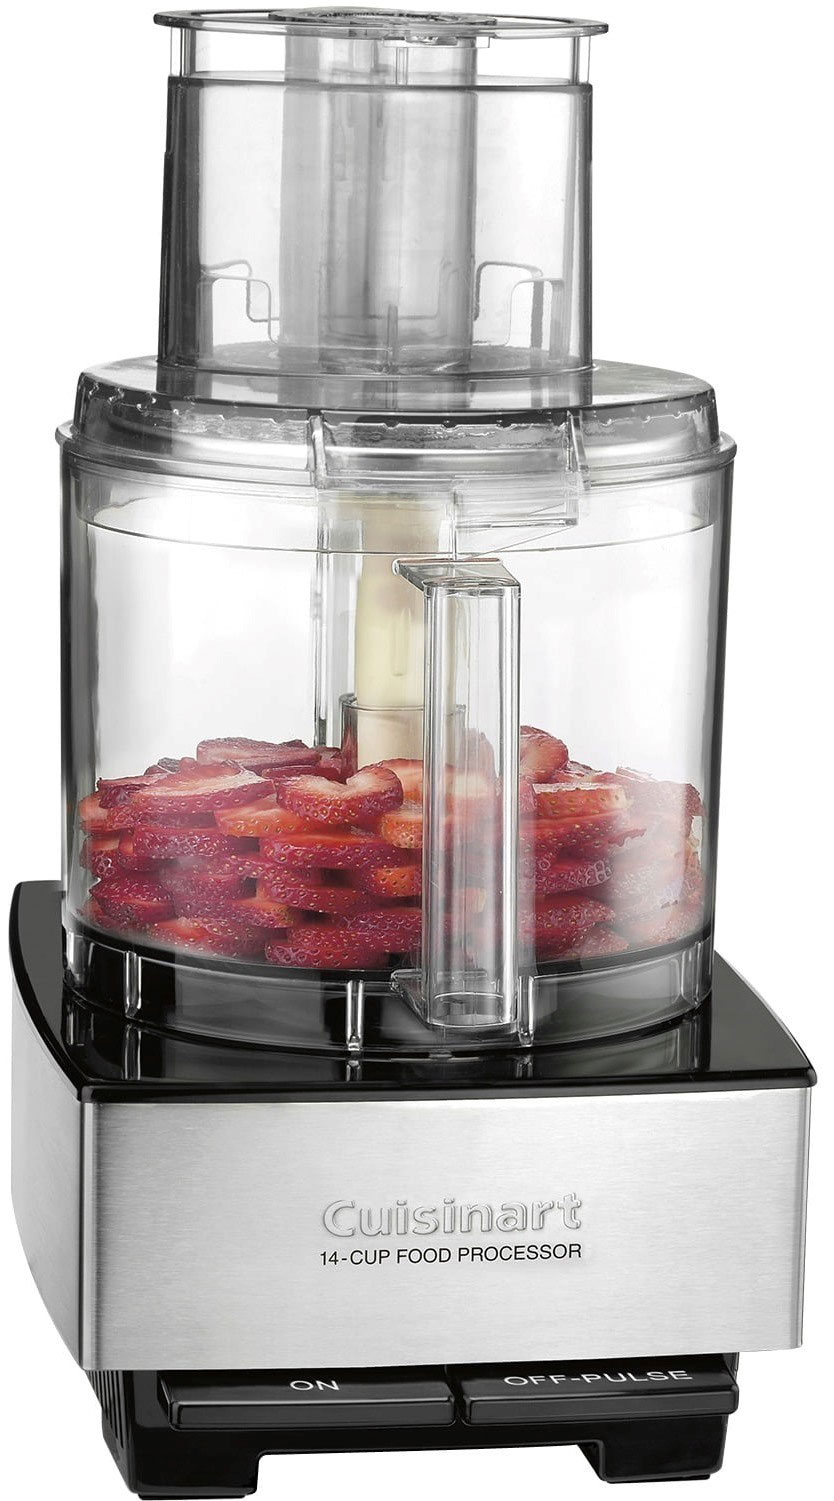 Elite Collection® 2.0 12 Cup Food Processor for sale or rent at Bargain  Center serving Southeatern Kansas, Northeastern Oklahoma, and Northwest  Arkansas.